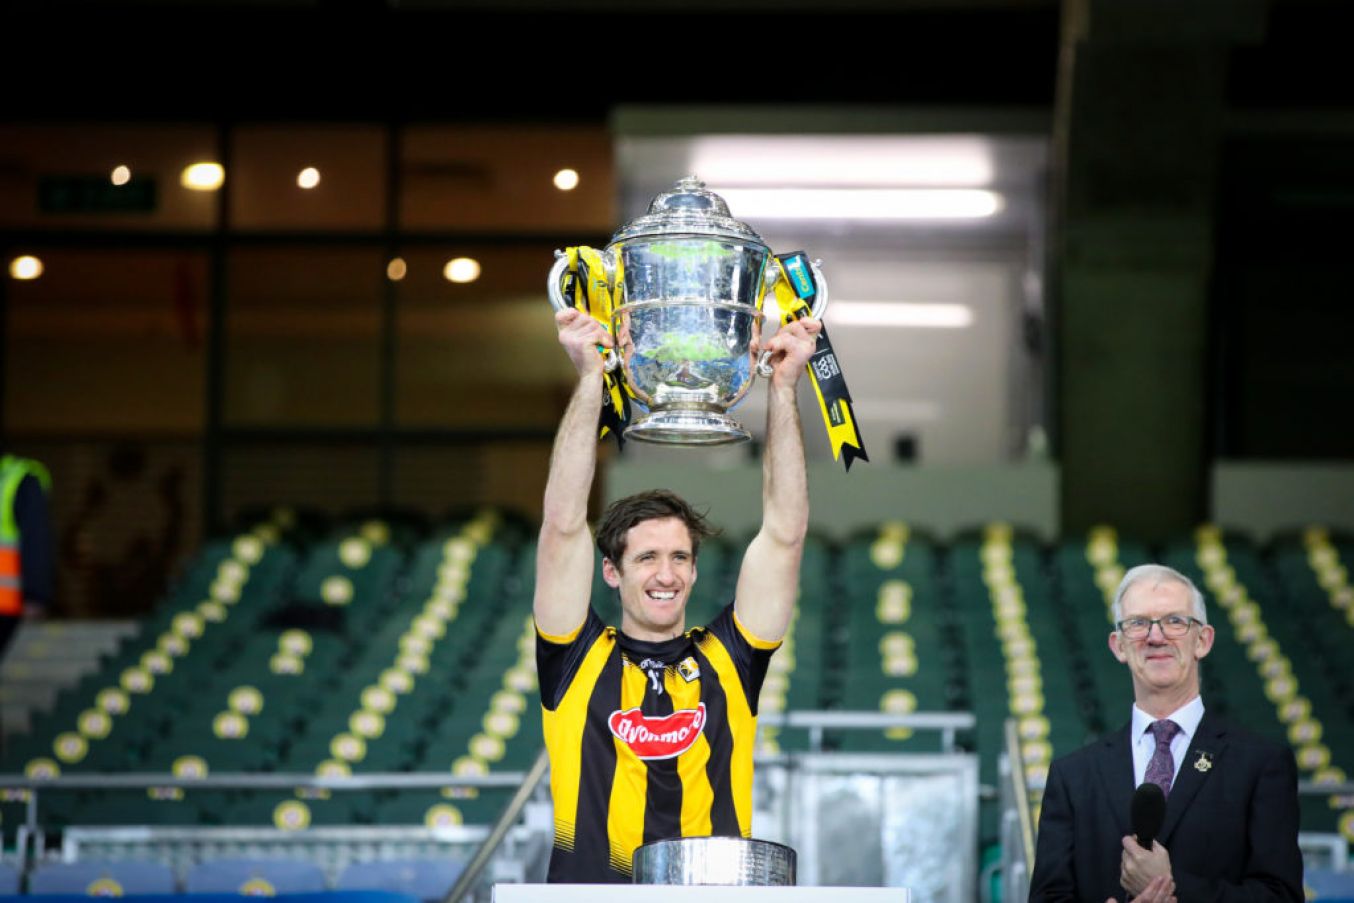 Kilkenny Captain Colin Fennelly Lifts The Bob O’keeffe Cup. Credit ©Inpho/Ryan Byrne